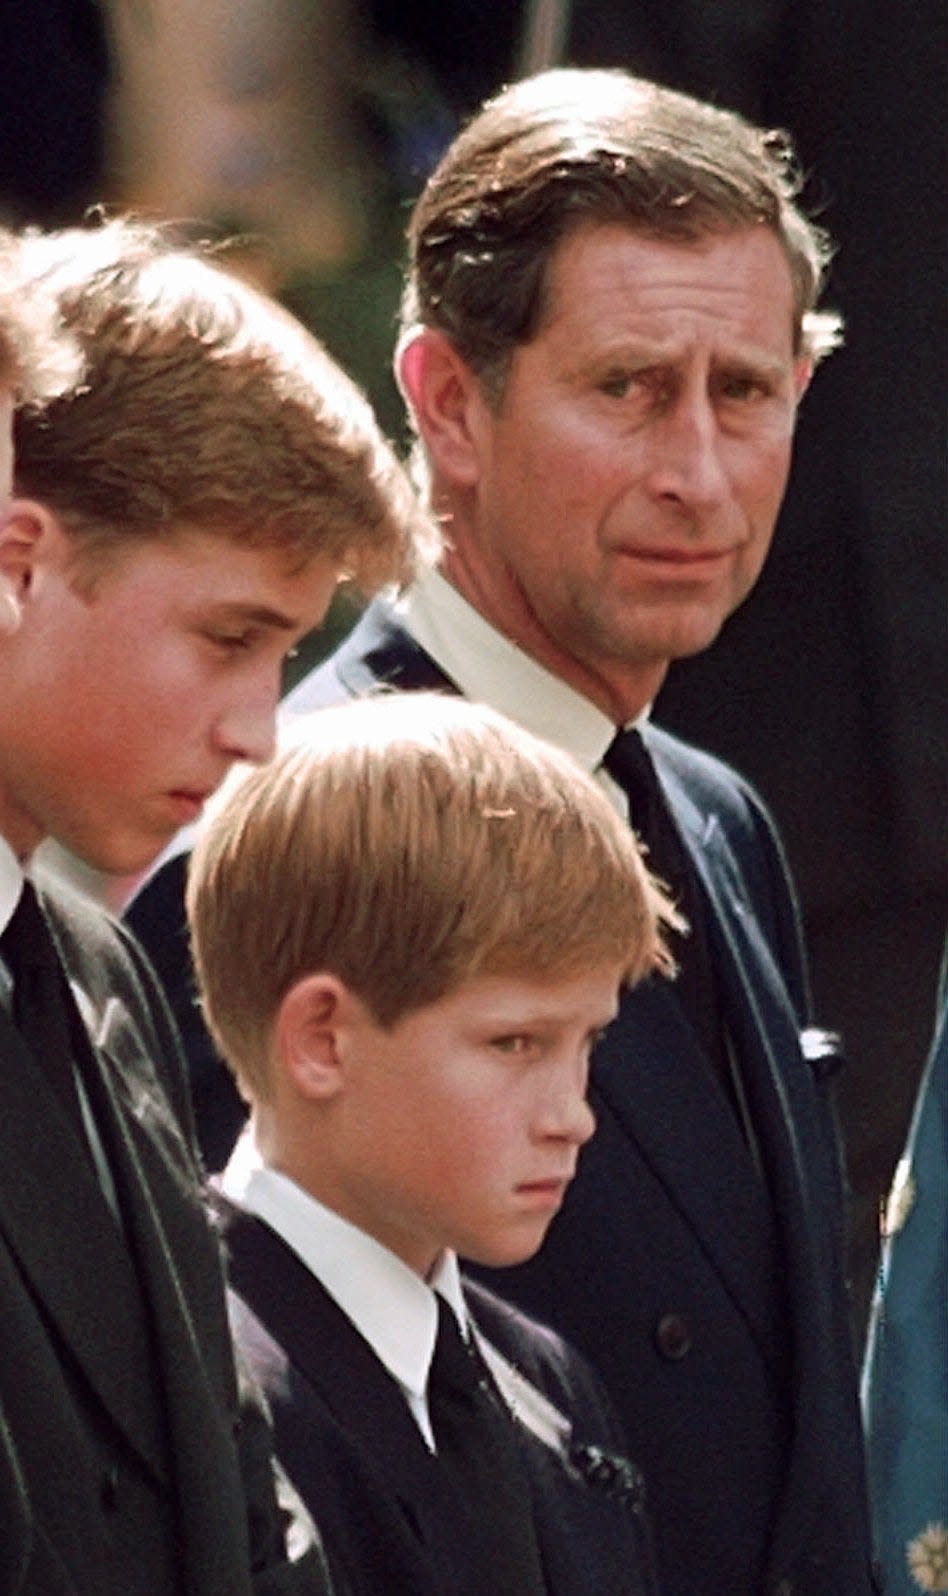 The Prince of Wales casts a concerned glance towards his sons Prince William (left) and Prince Harry as they wait for the coffin of Princess Diana to be loaded into a hearse outside of Westminster Abbey, Saturday, Sept. 6, 1997, in London.